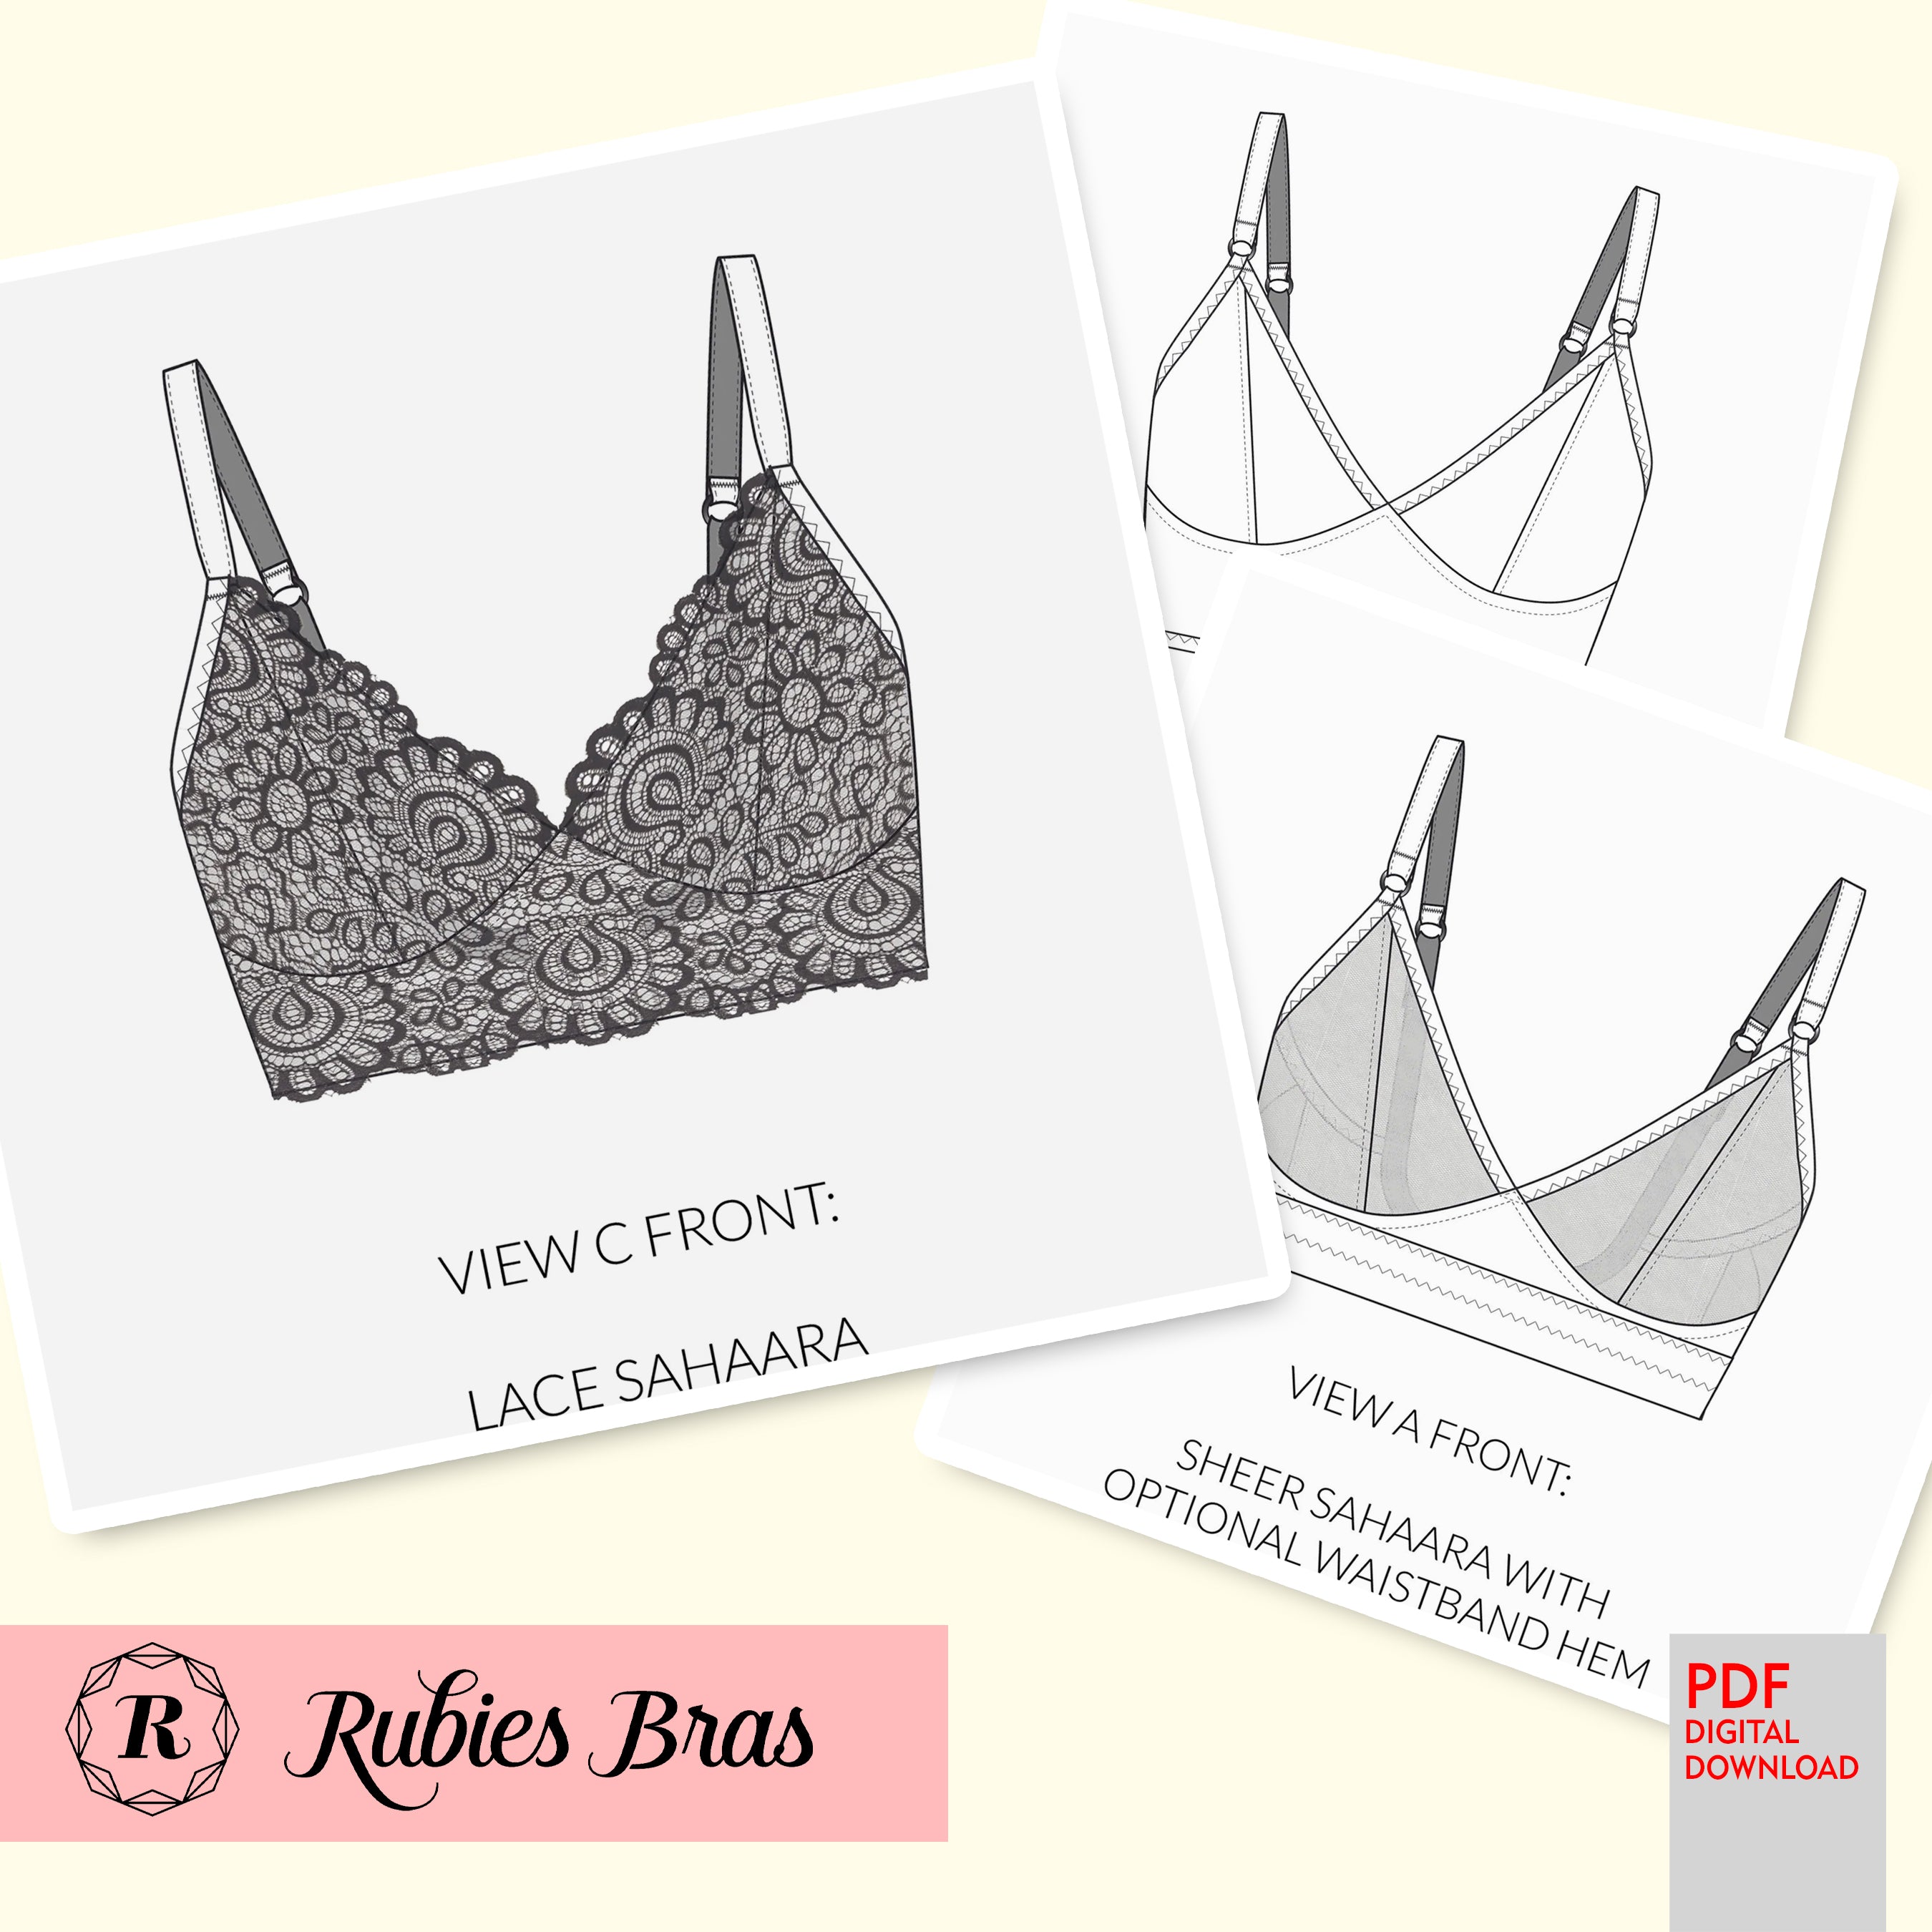 From the drawing to the making: Bralette